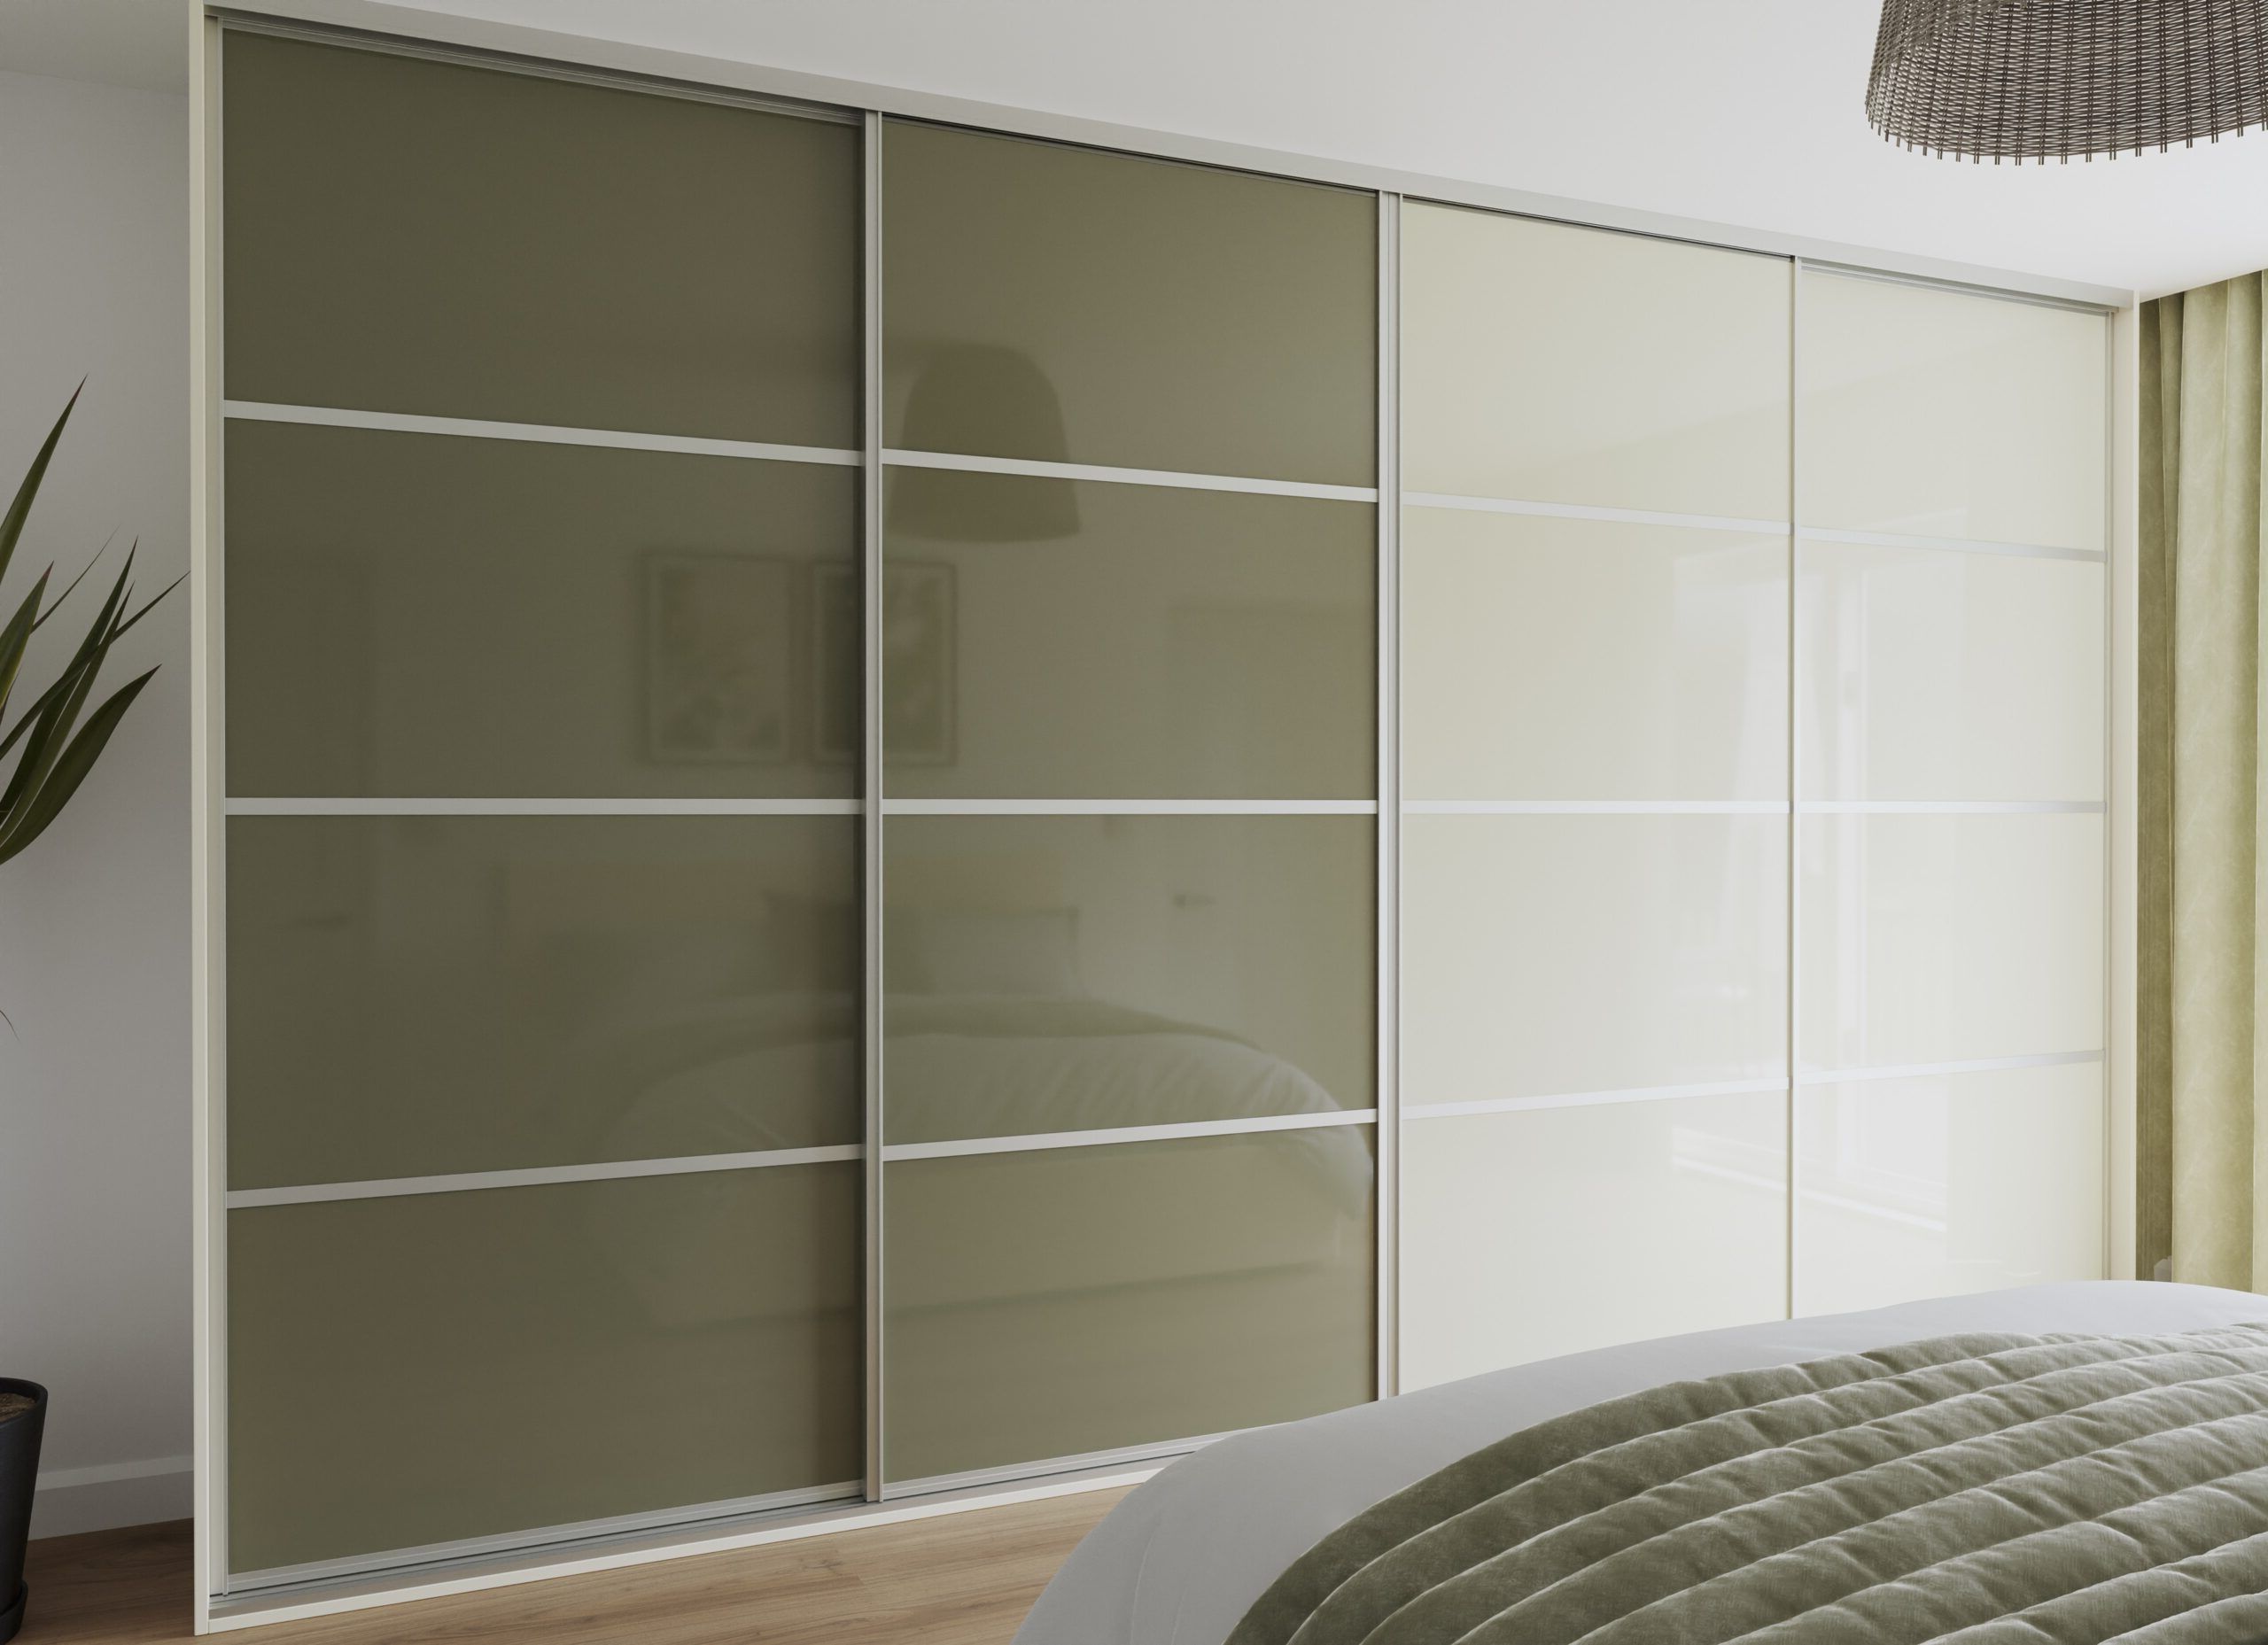 Sliding Wardrobes – Trend Interiors With Cameo Wardrobes (View 13 of 20)